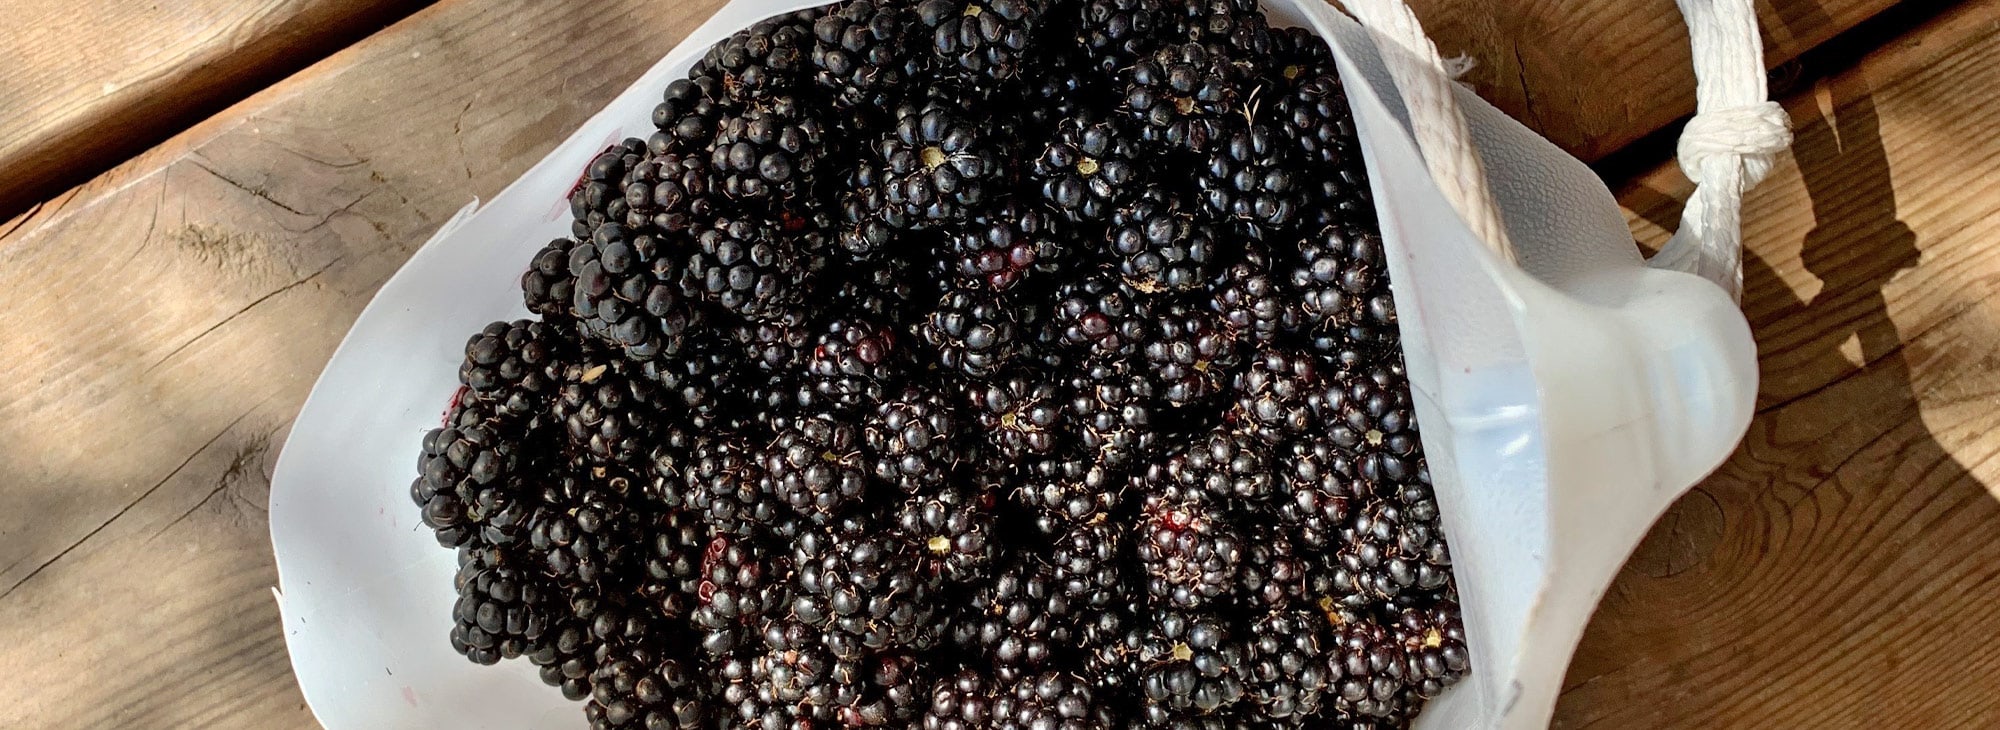 A Quick and Juicy Guide to Berries of the Northwest